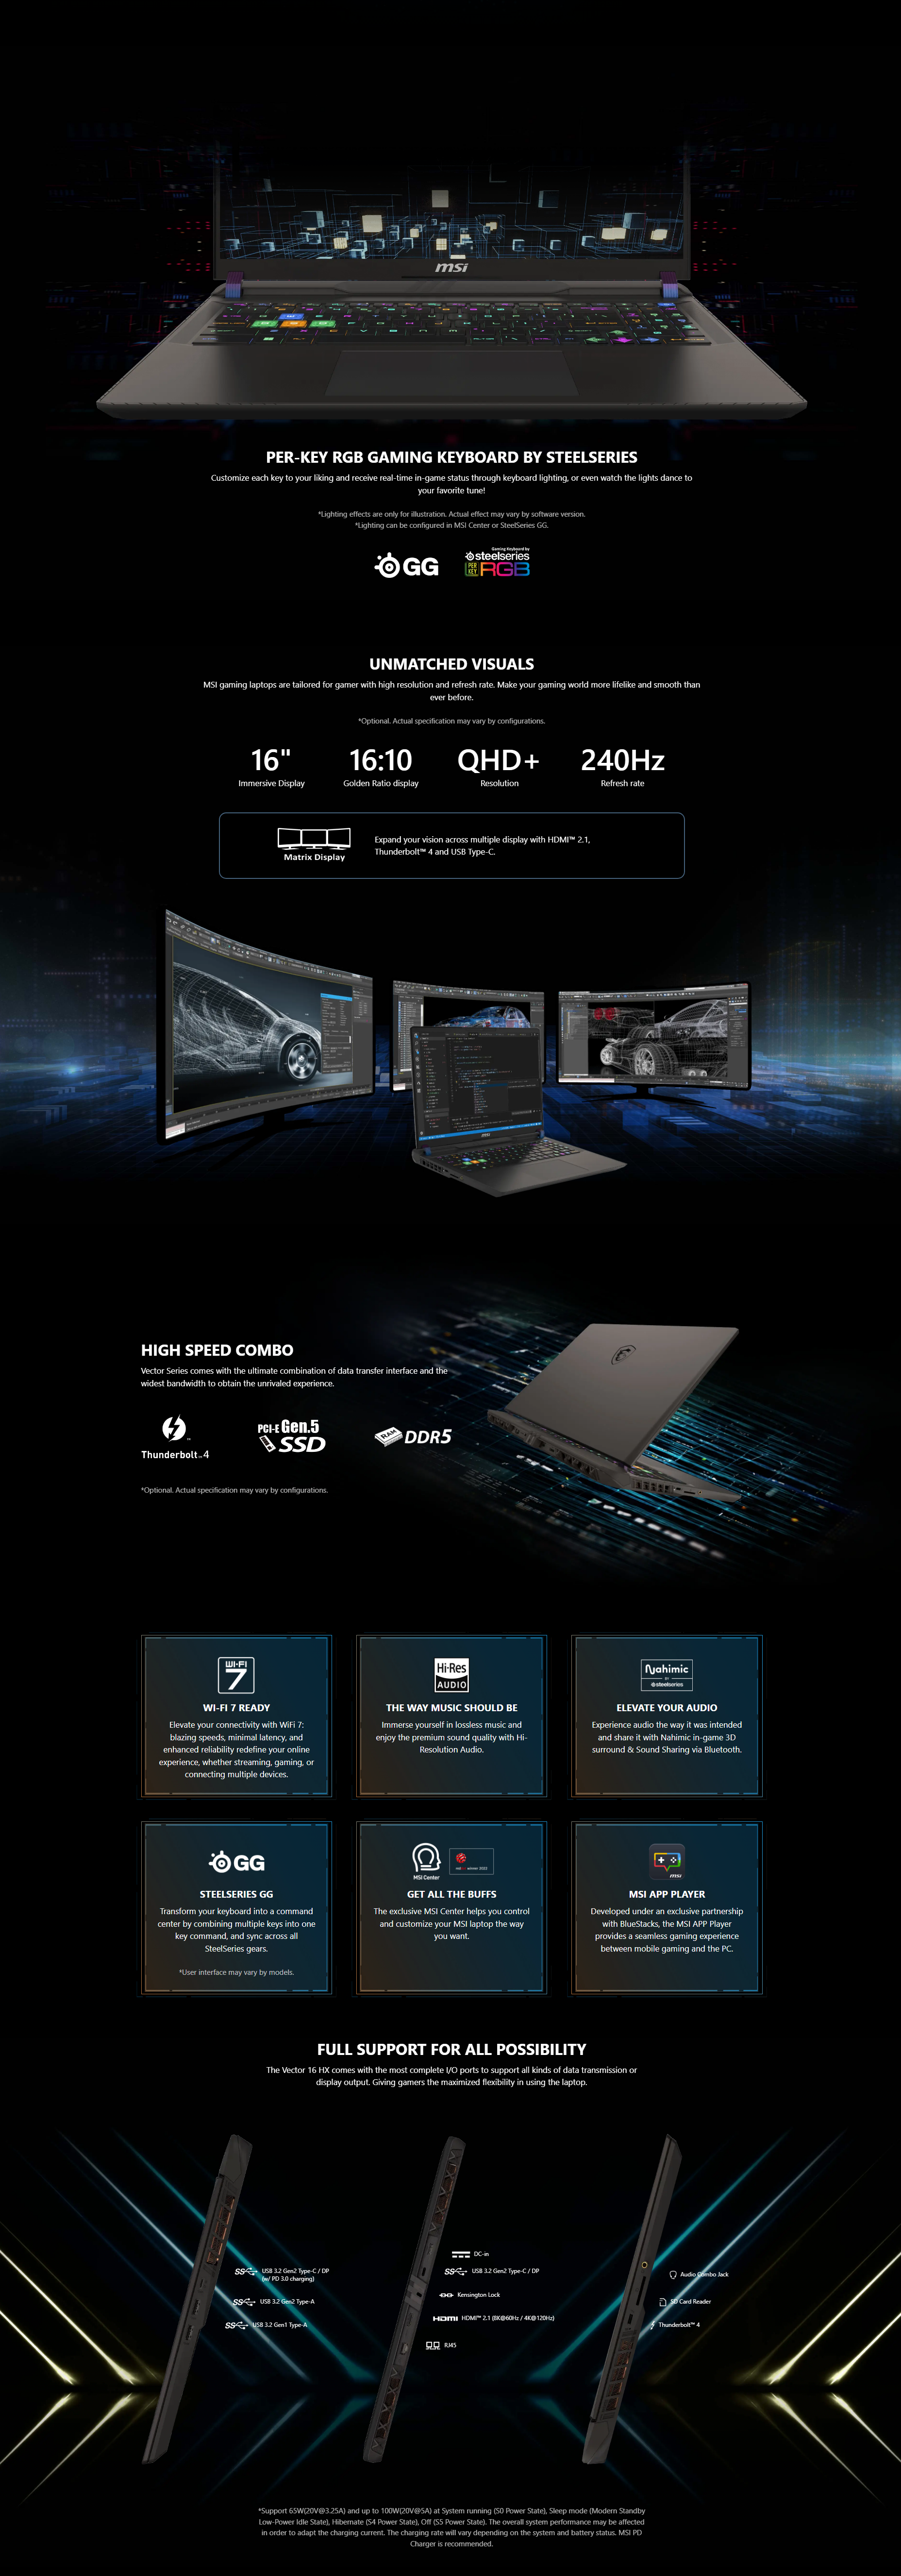 A large marketing image providing additional information about the product MSI Vector 16 HX (A14V) - 16" 240Hz, 14th Gen i9, RTX 4070, 32GB/2TB - Win 11 Gaming Notebook - Additional alt info not provided